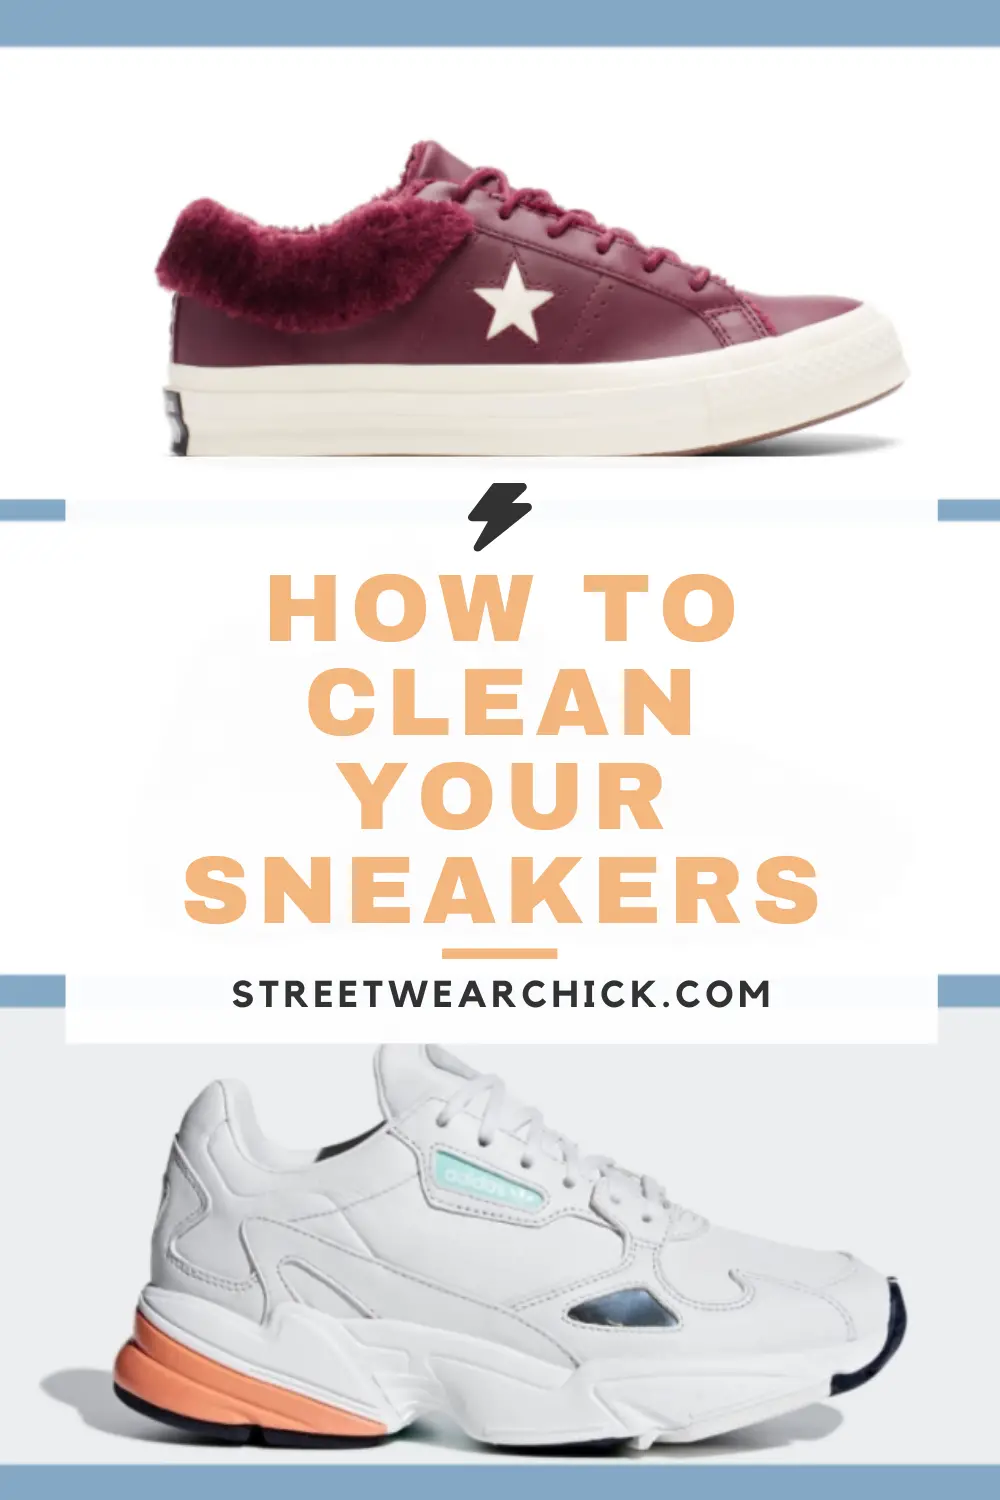 How To Clean Your Sneakers in 2020